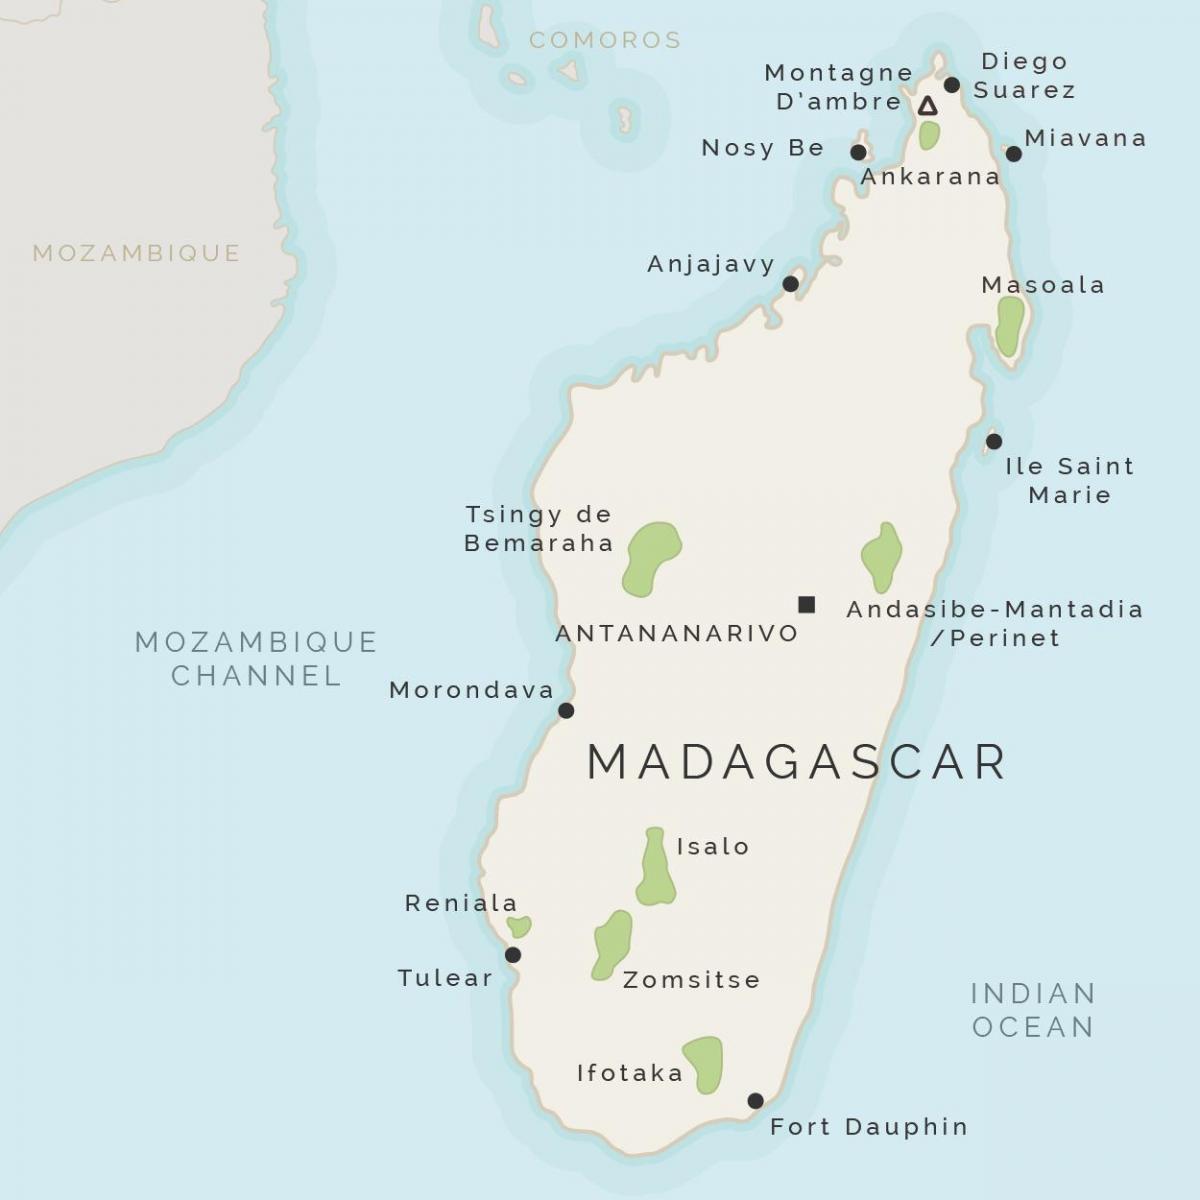 map of Madagascar and surrounding islands